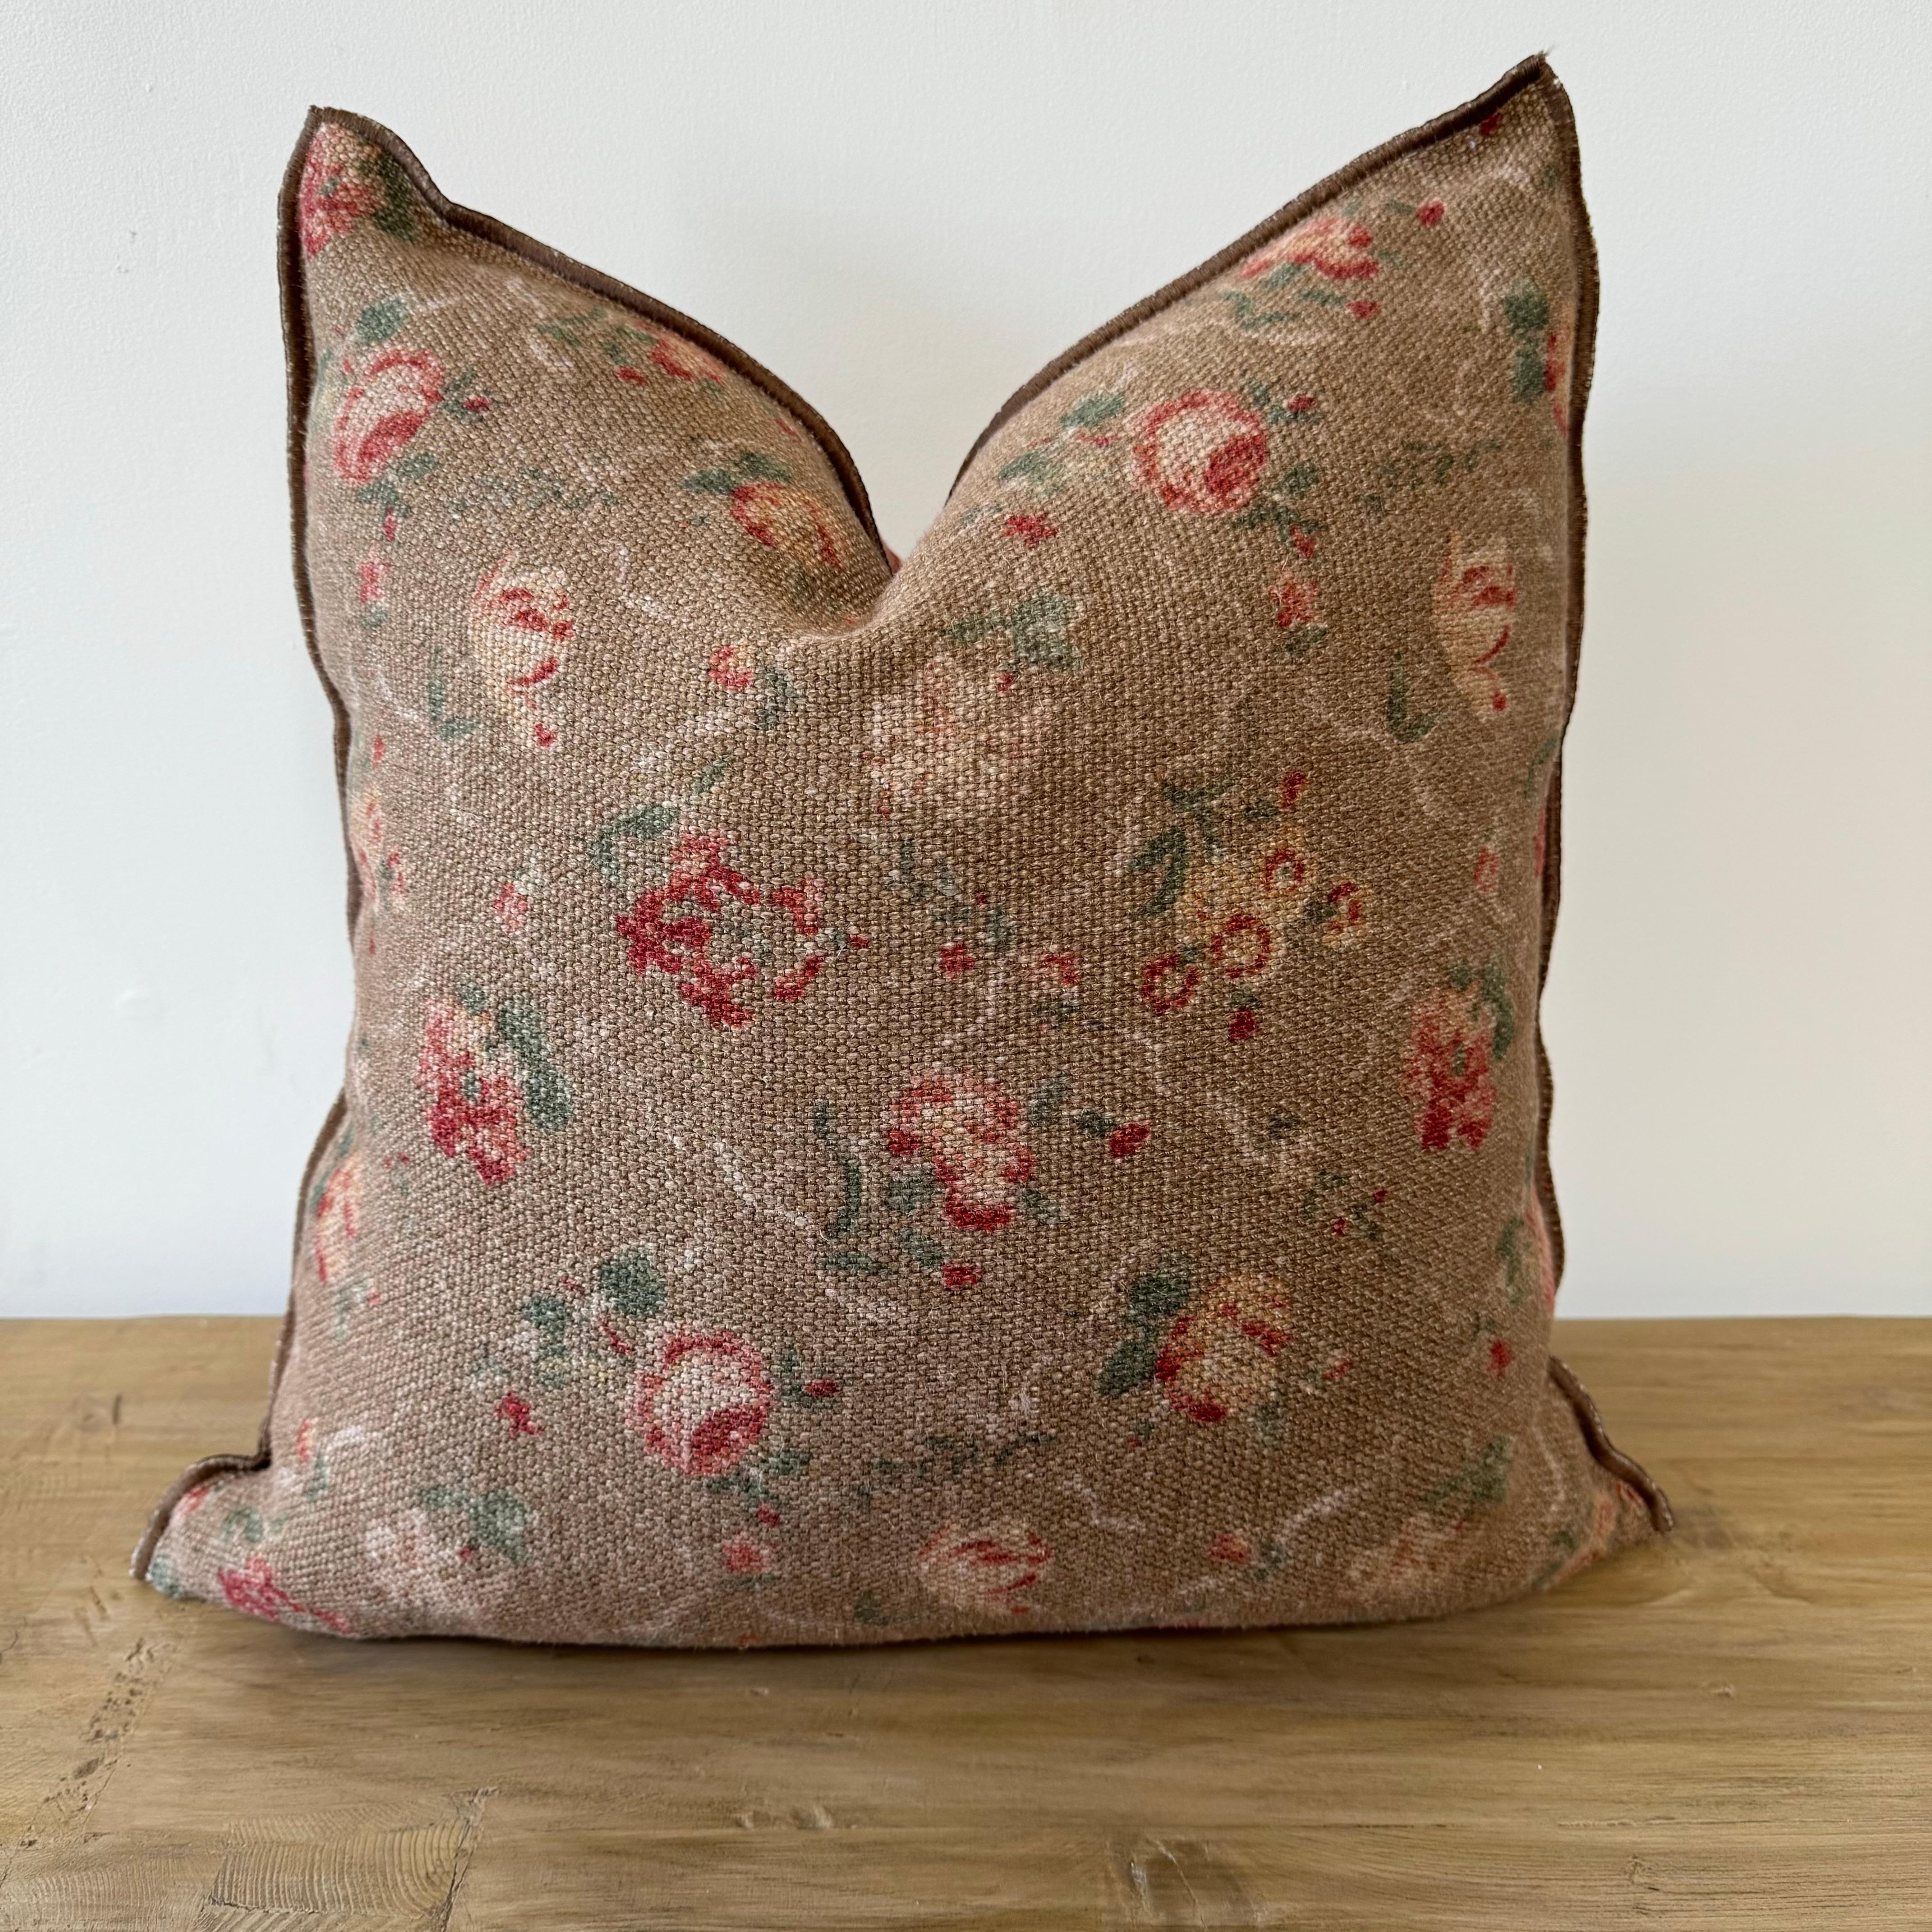 Made in France
100% pure linen pillow printed on a brown linen with floral print.  The edges have a binded edge, and metal zipper closure
Wabi Sabi Estampado
Collection: Jardin Secret Blush
Size: 20